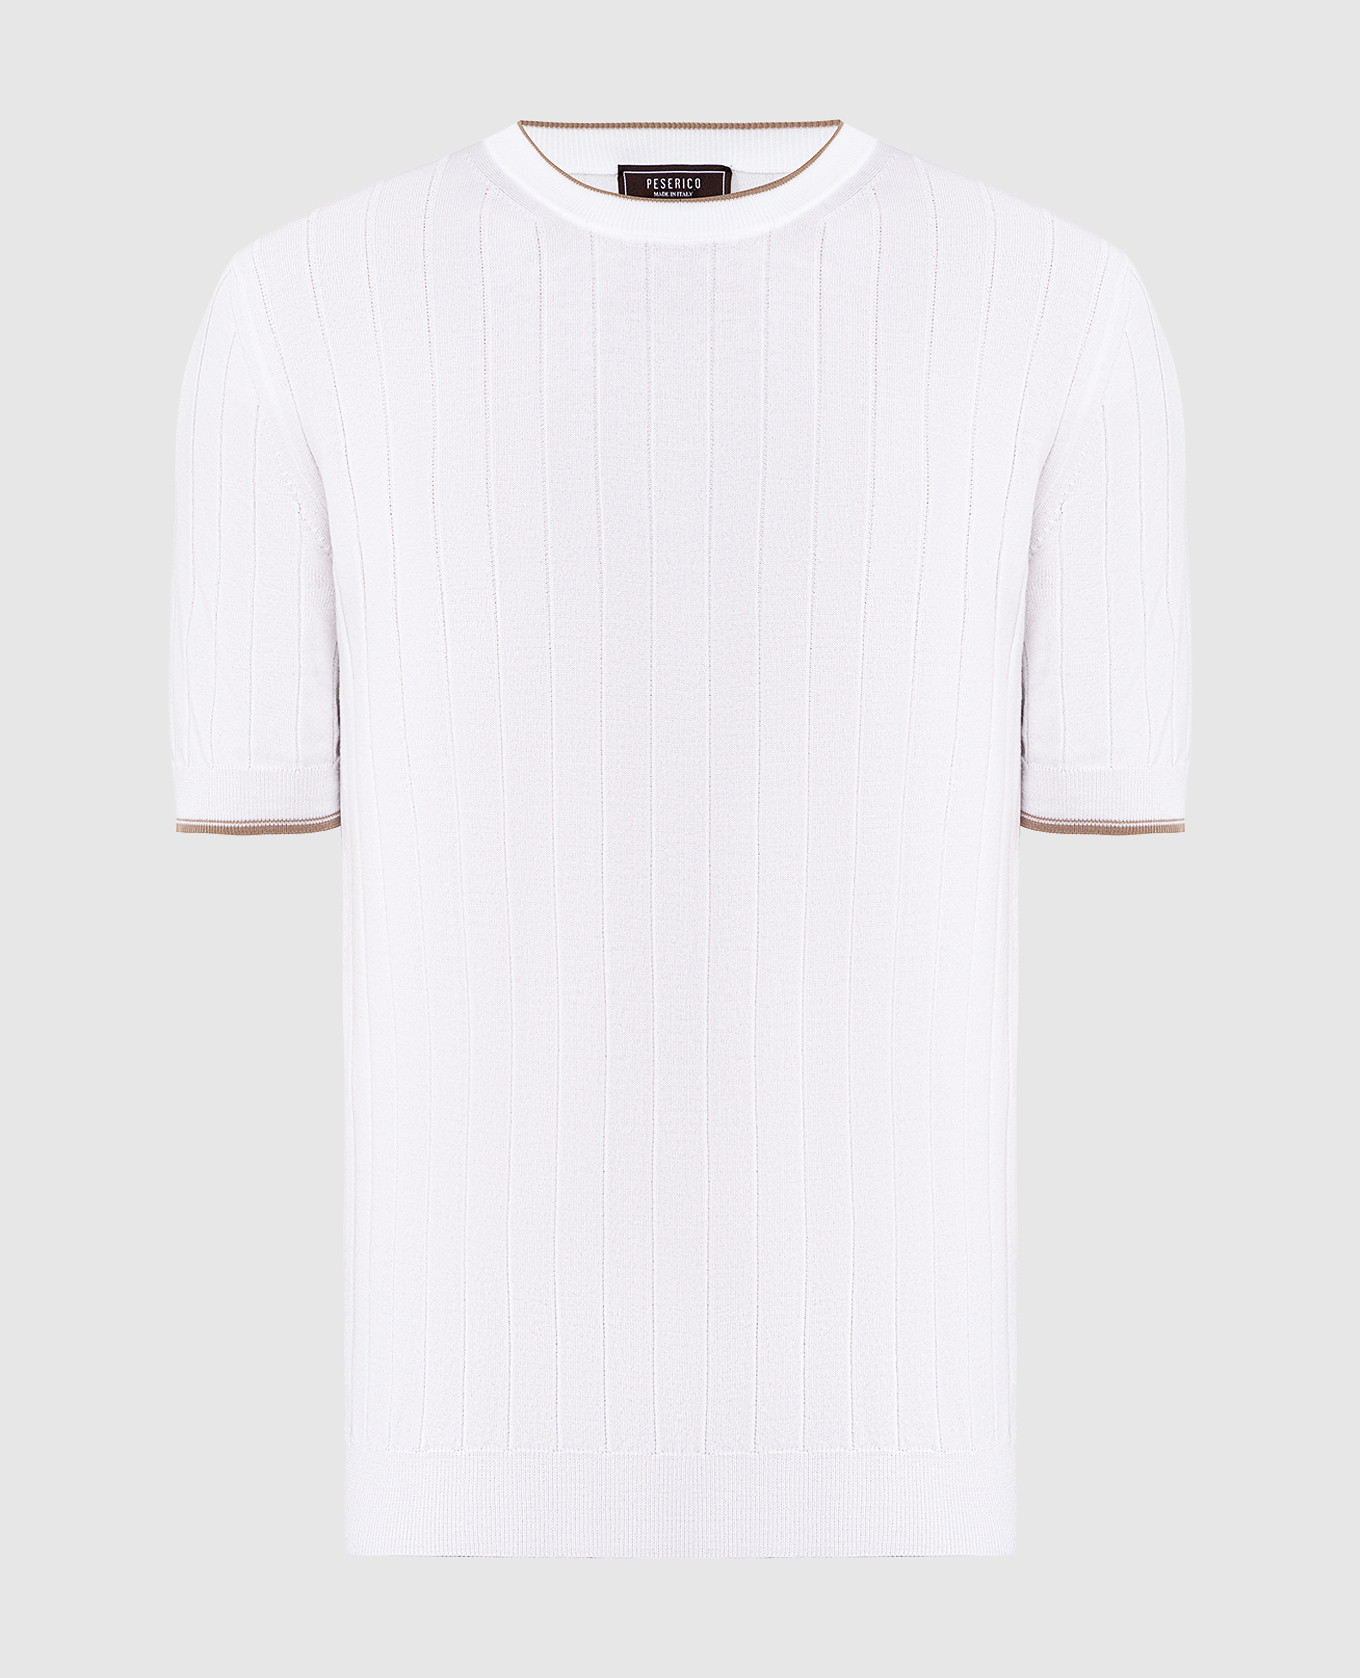 White t-shirt in a textured pattern